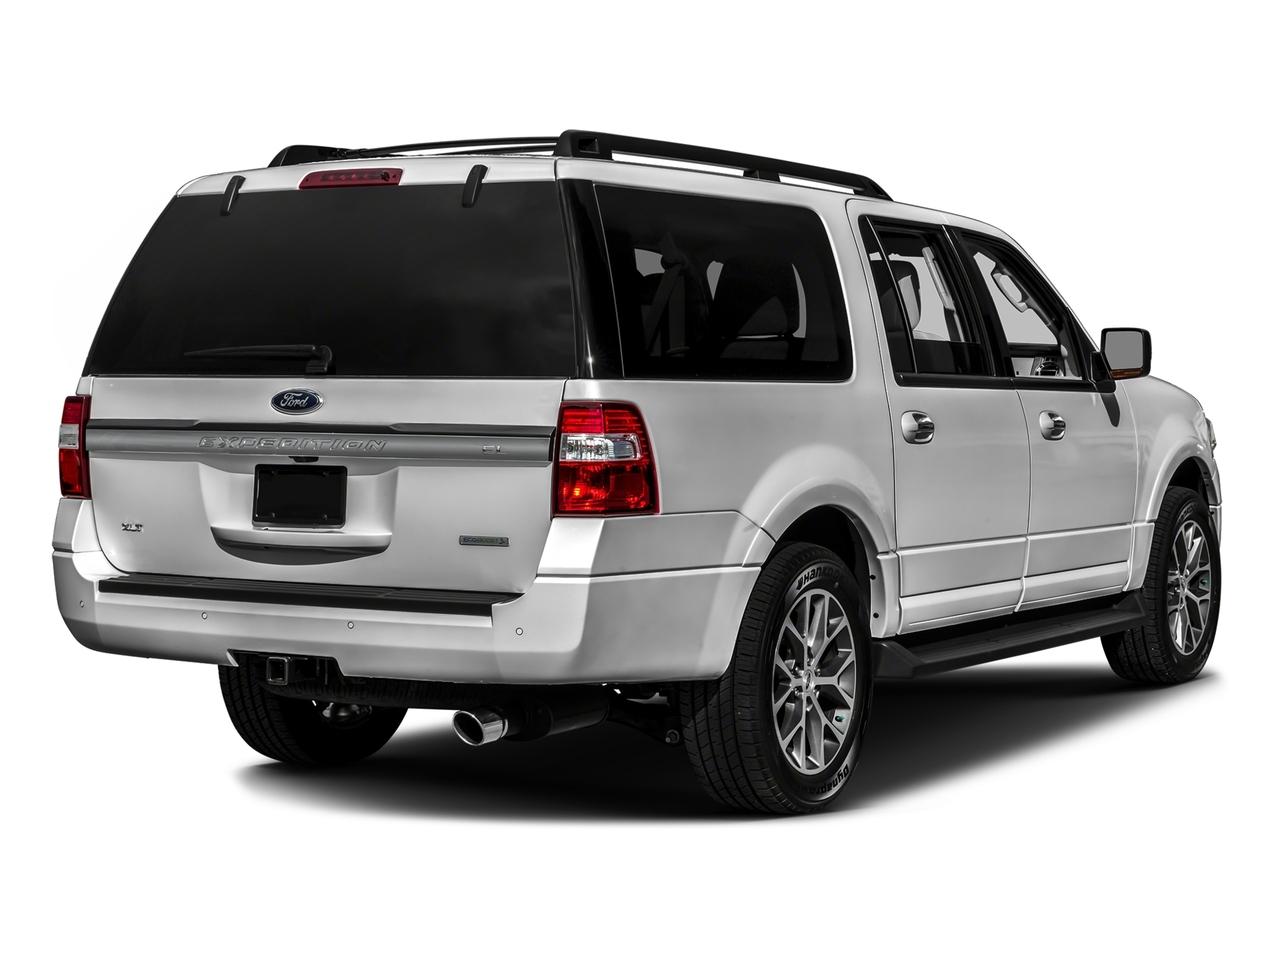 2017 Ford Expedition EL Vehicle Photo in Ft. Myers, FL 33907